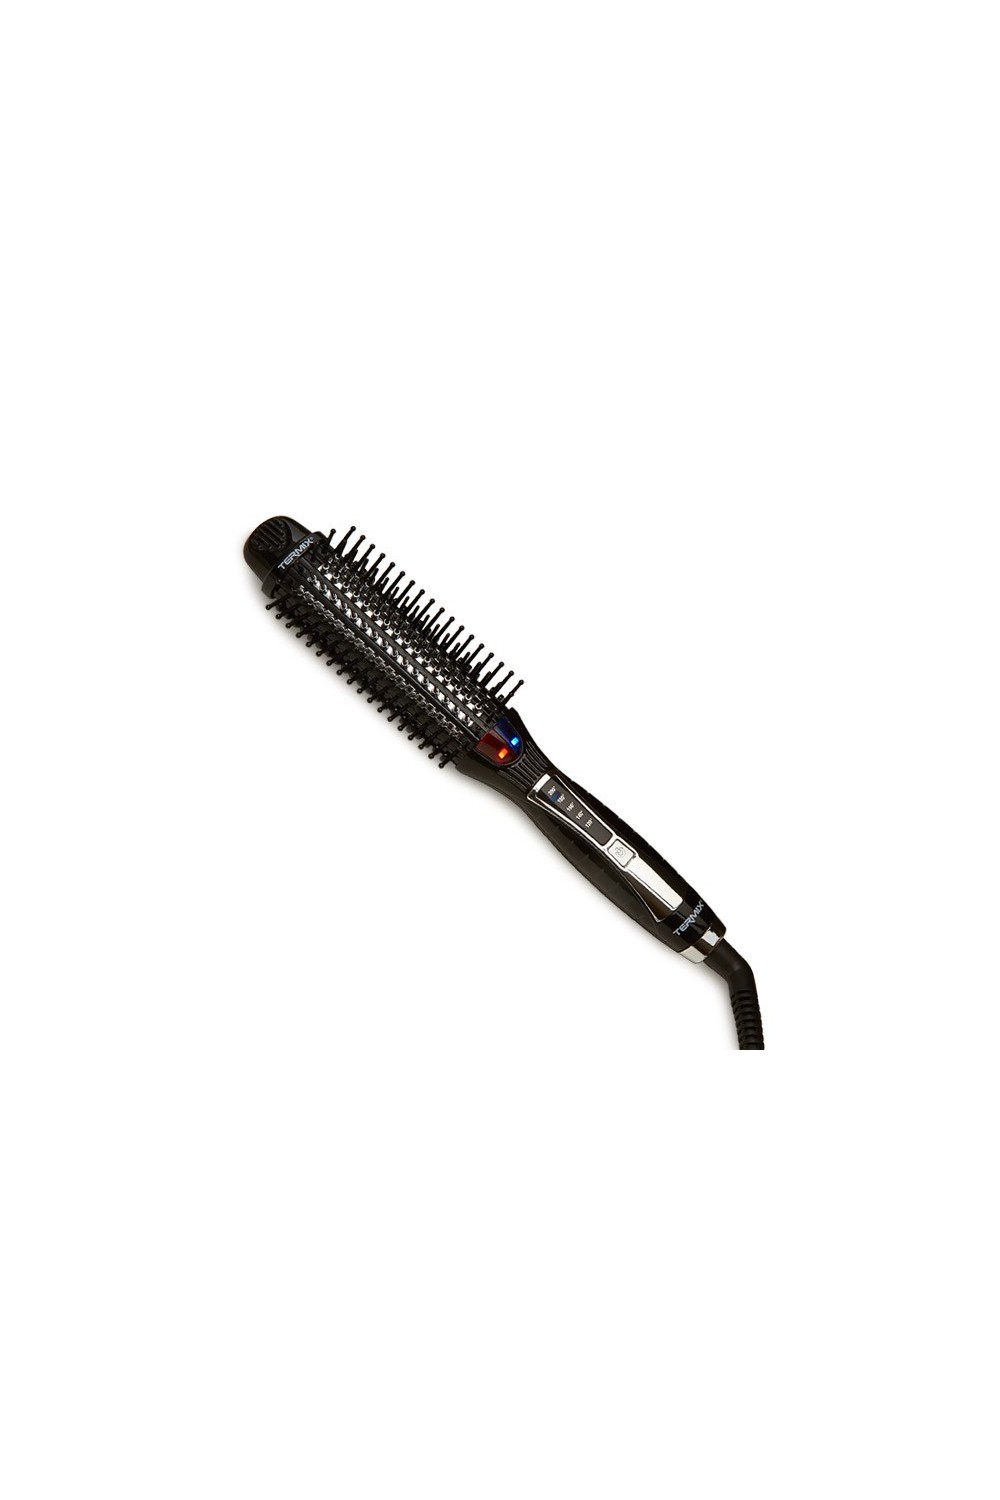 Termix Electric Pro Thermal Brush Straightening